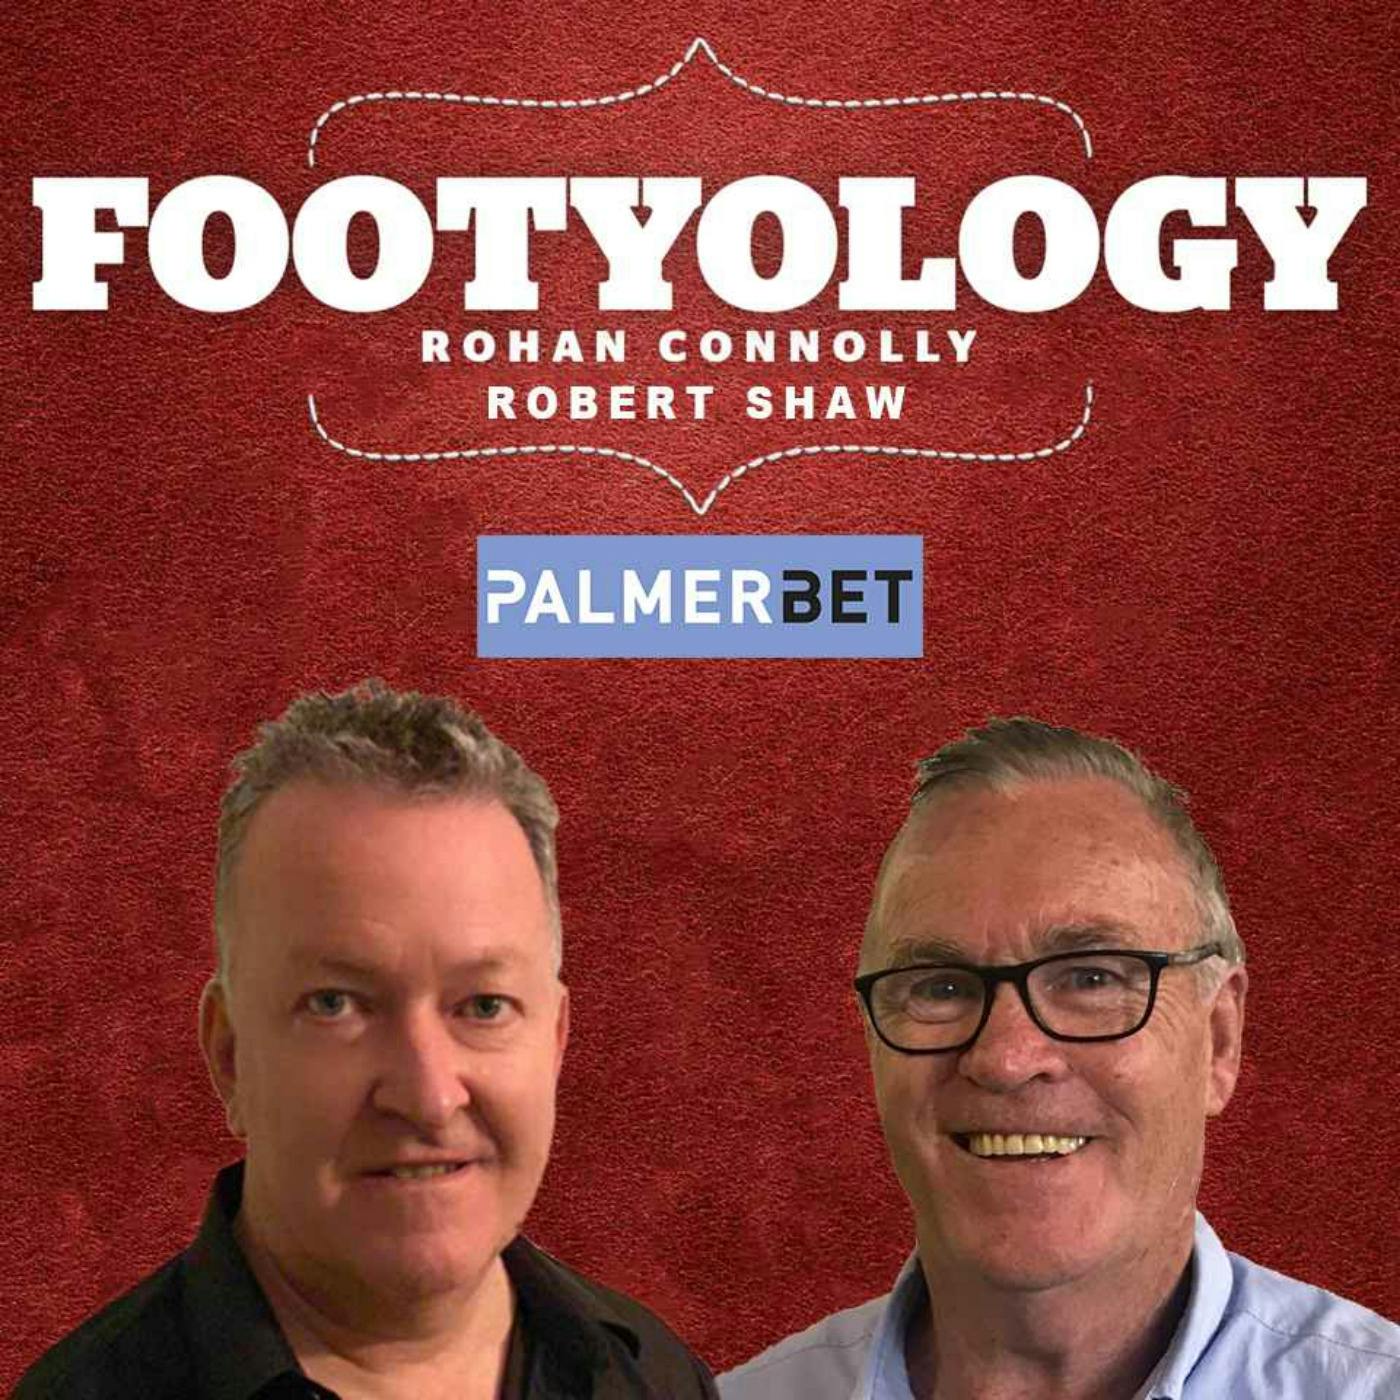 Footyology Podcast - June 8th 2022